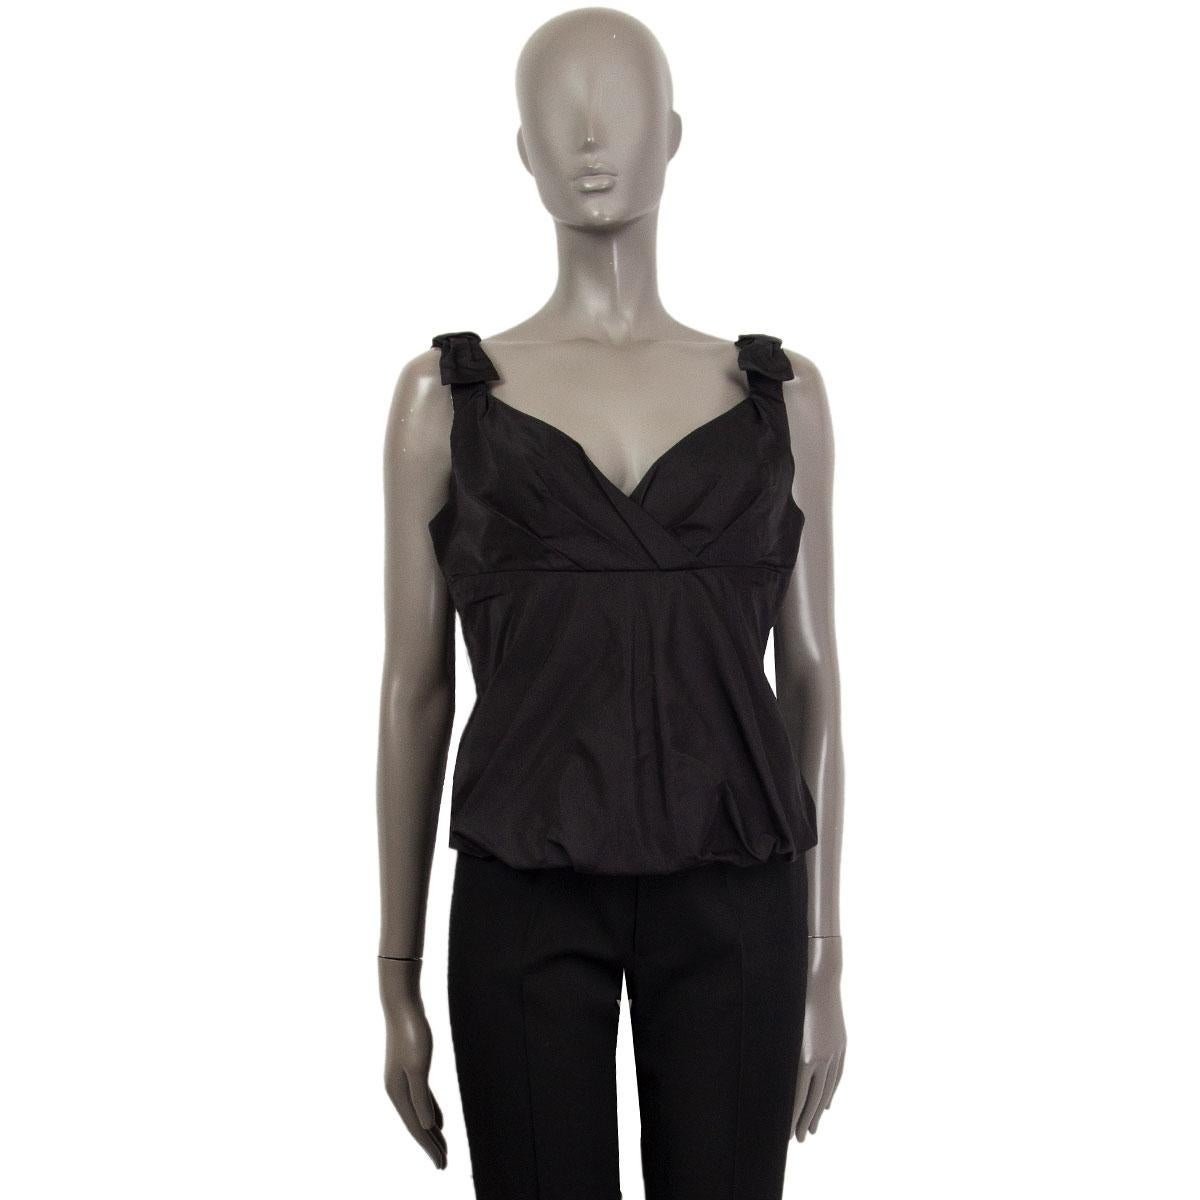 100% authentic Louis Vuitton sleeveless bustier-style top in black silk (100%) embellished with bow detail on shoulders. Opens with a zipper on the back. Has been worn and is in excellent condition. 

Measurements
Tag Size	40
Size	M
Bust To	84cm